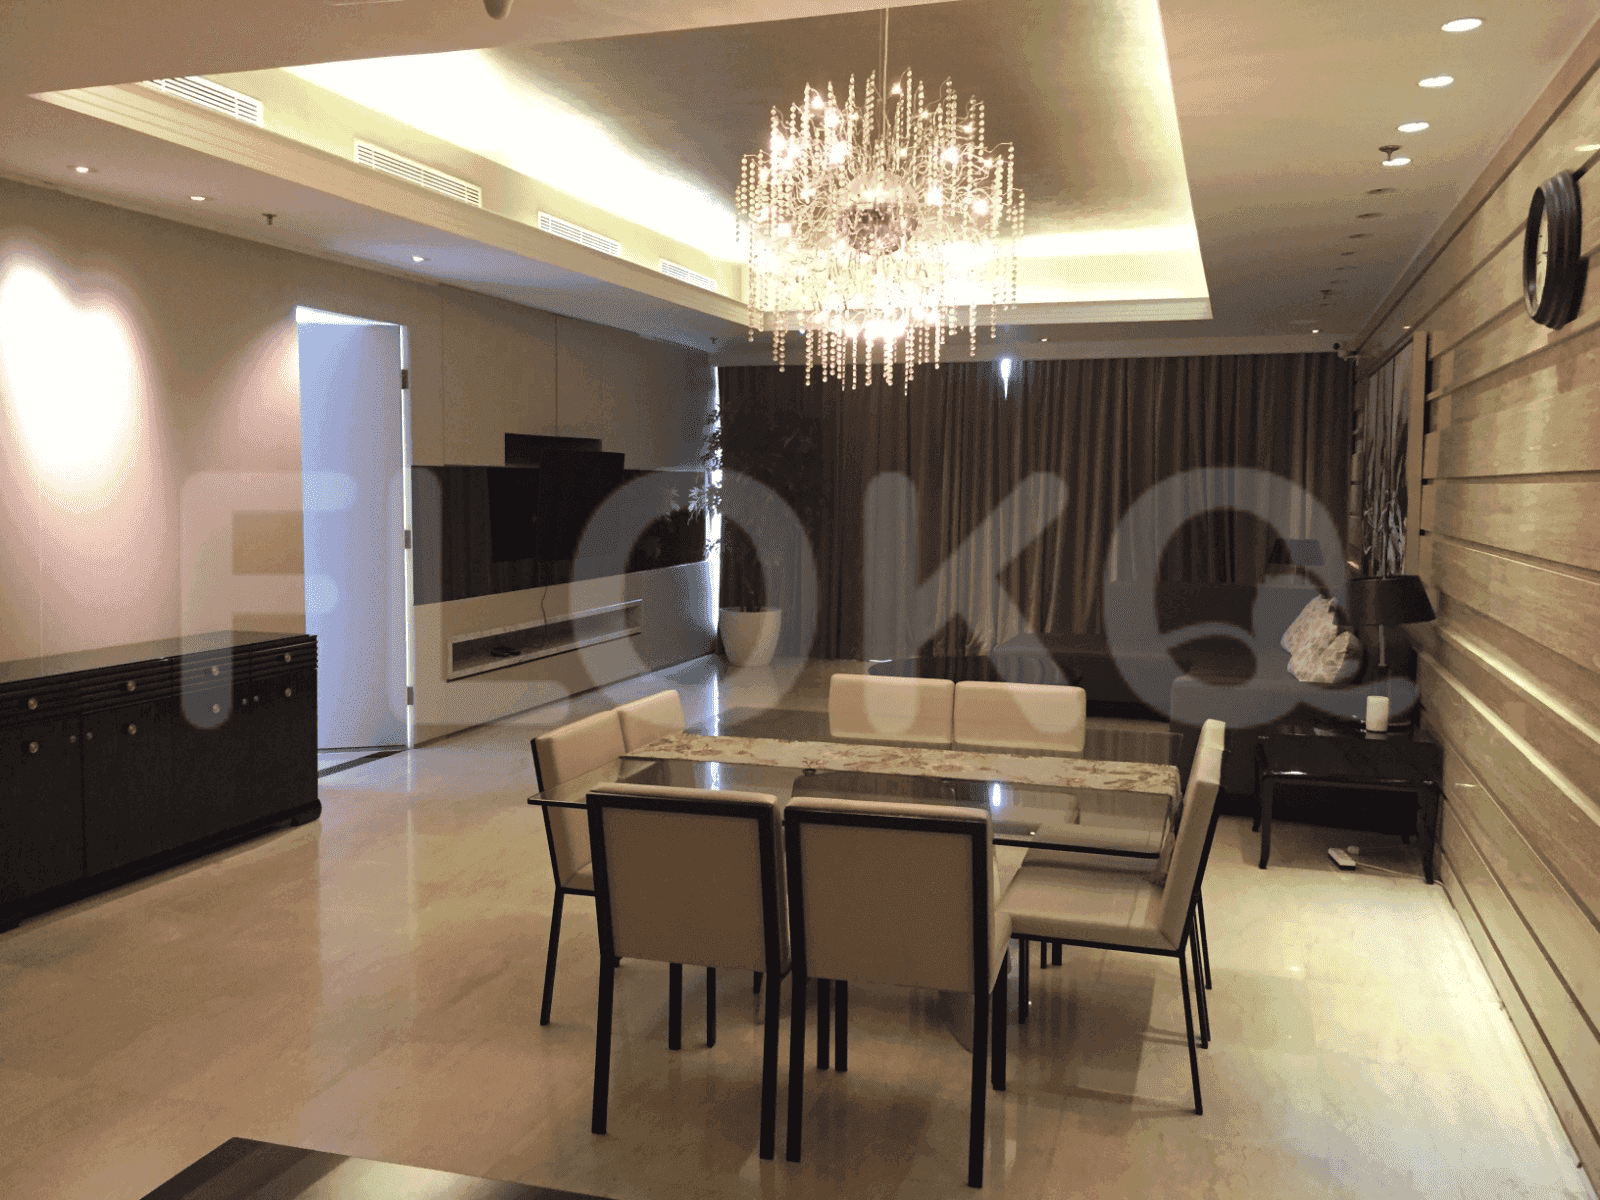 4 Bedroom on 46th Floor for Rent in KempinskI Grand Indonesia Apartment - fme35a 2